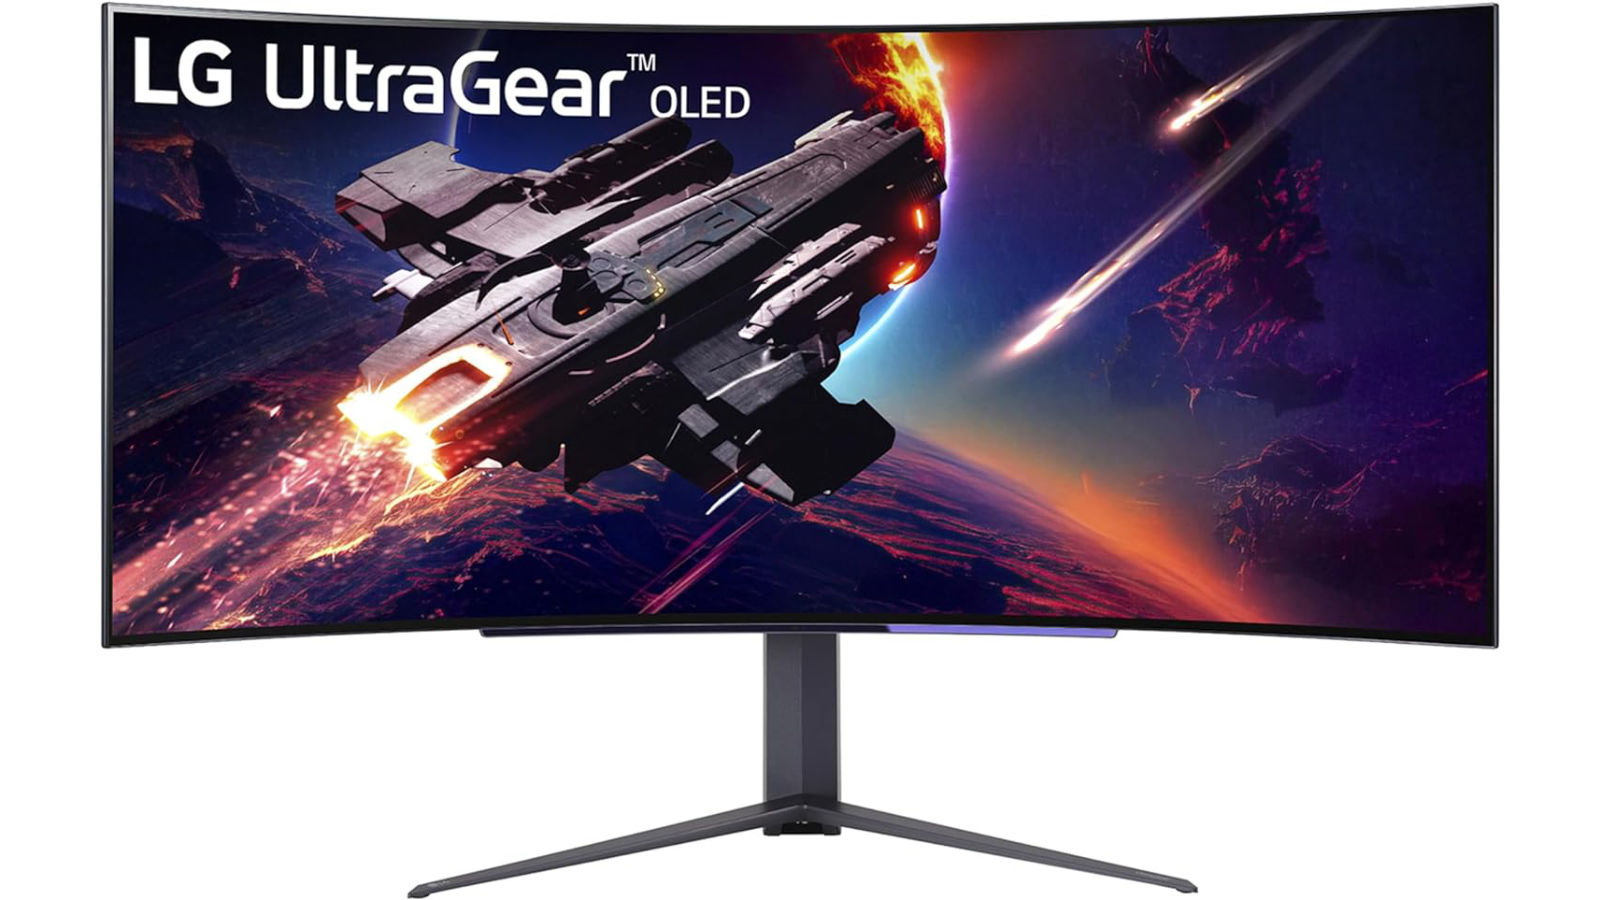 LG UltraGear 45GR95QE OLED gaming monitor against a white background.